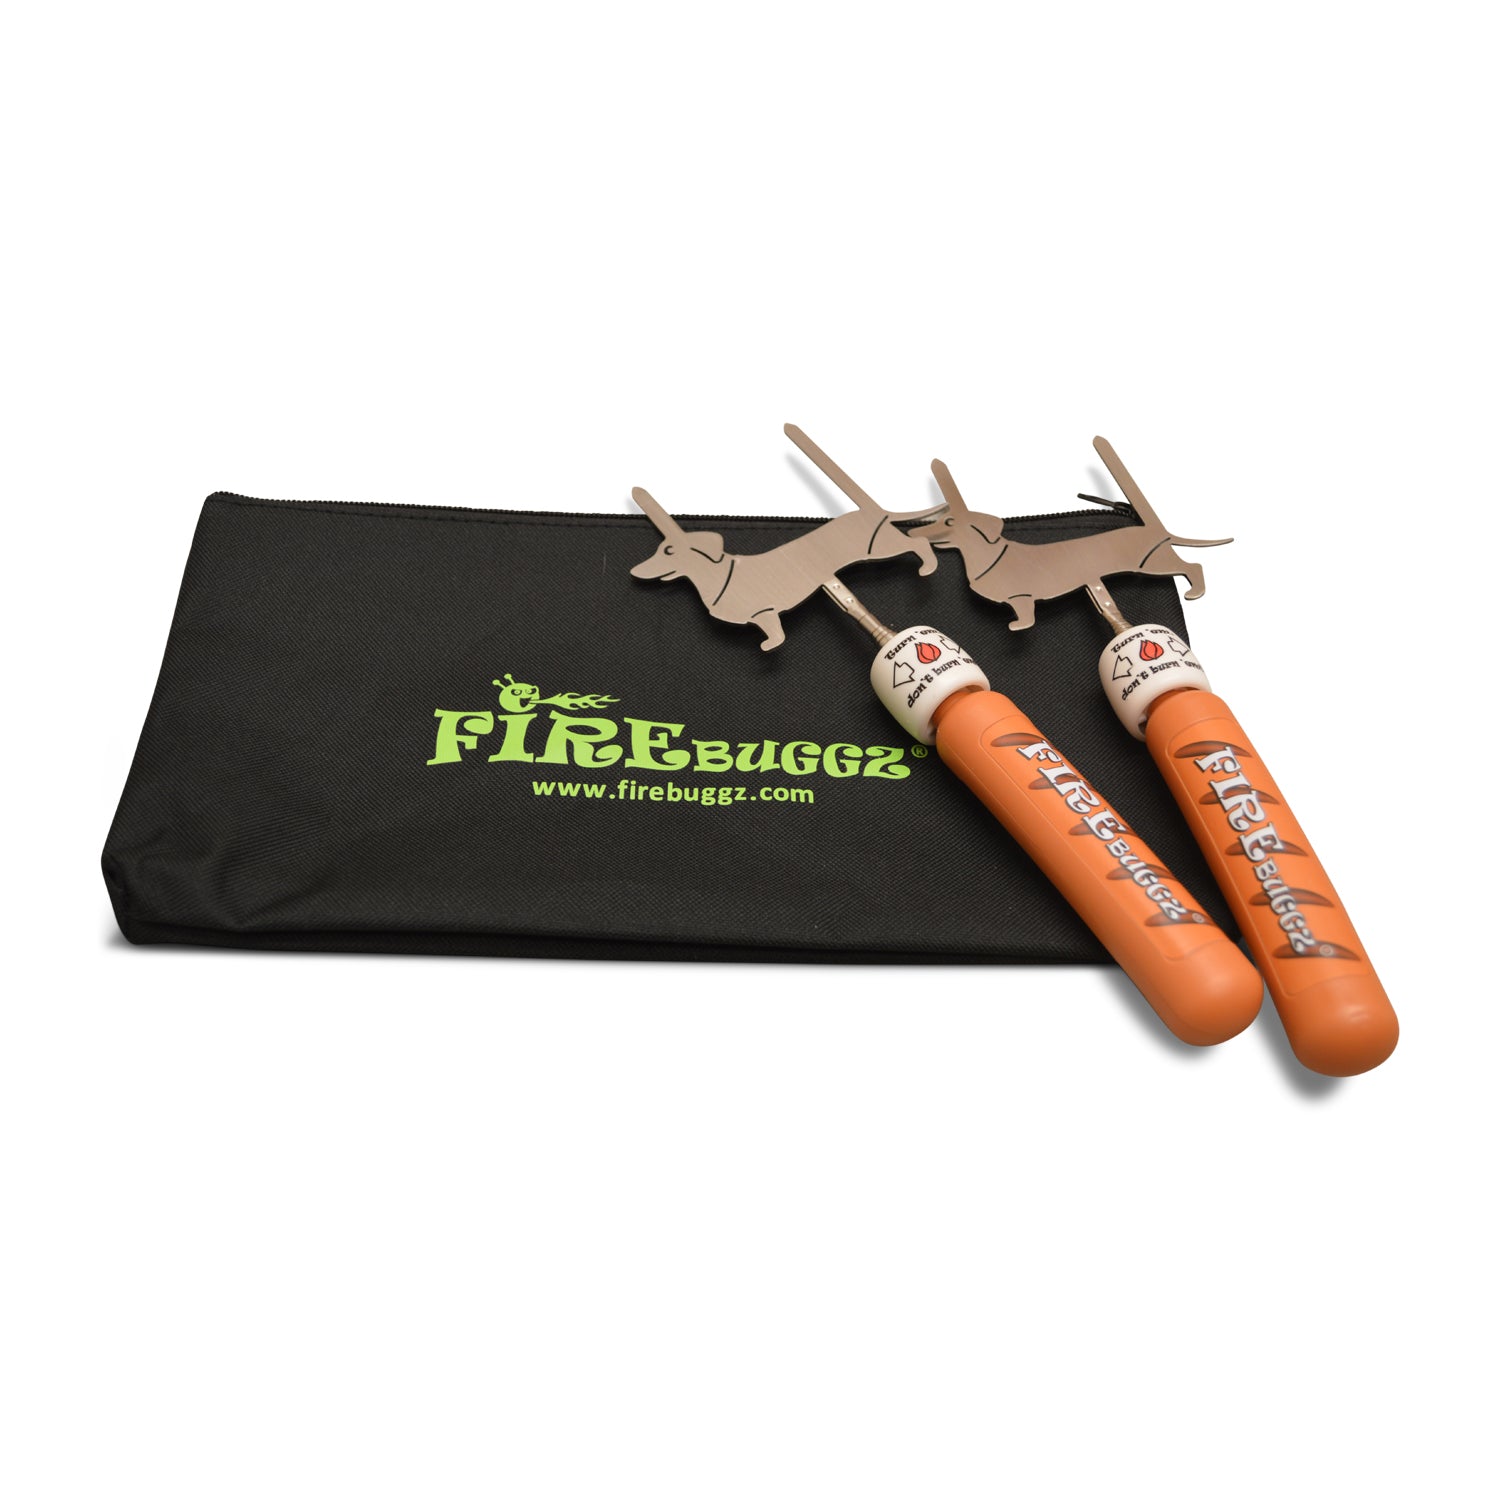 Wiener Dog Campfire Roaster Set of 2 with Deluxe Carry Bag